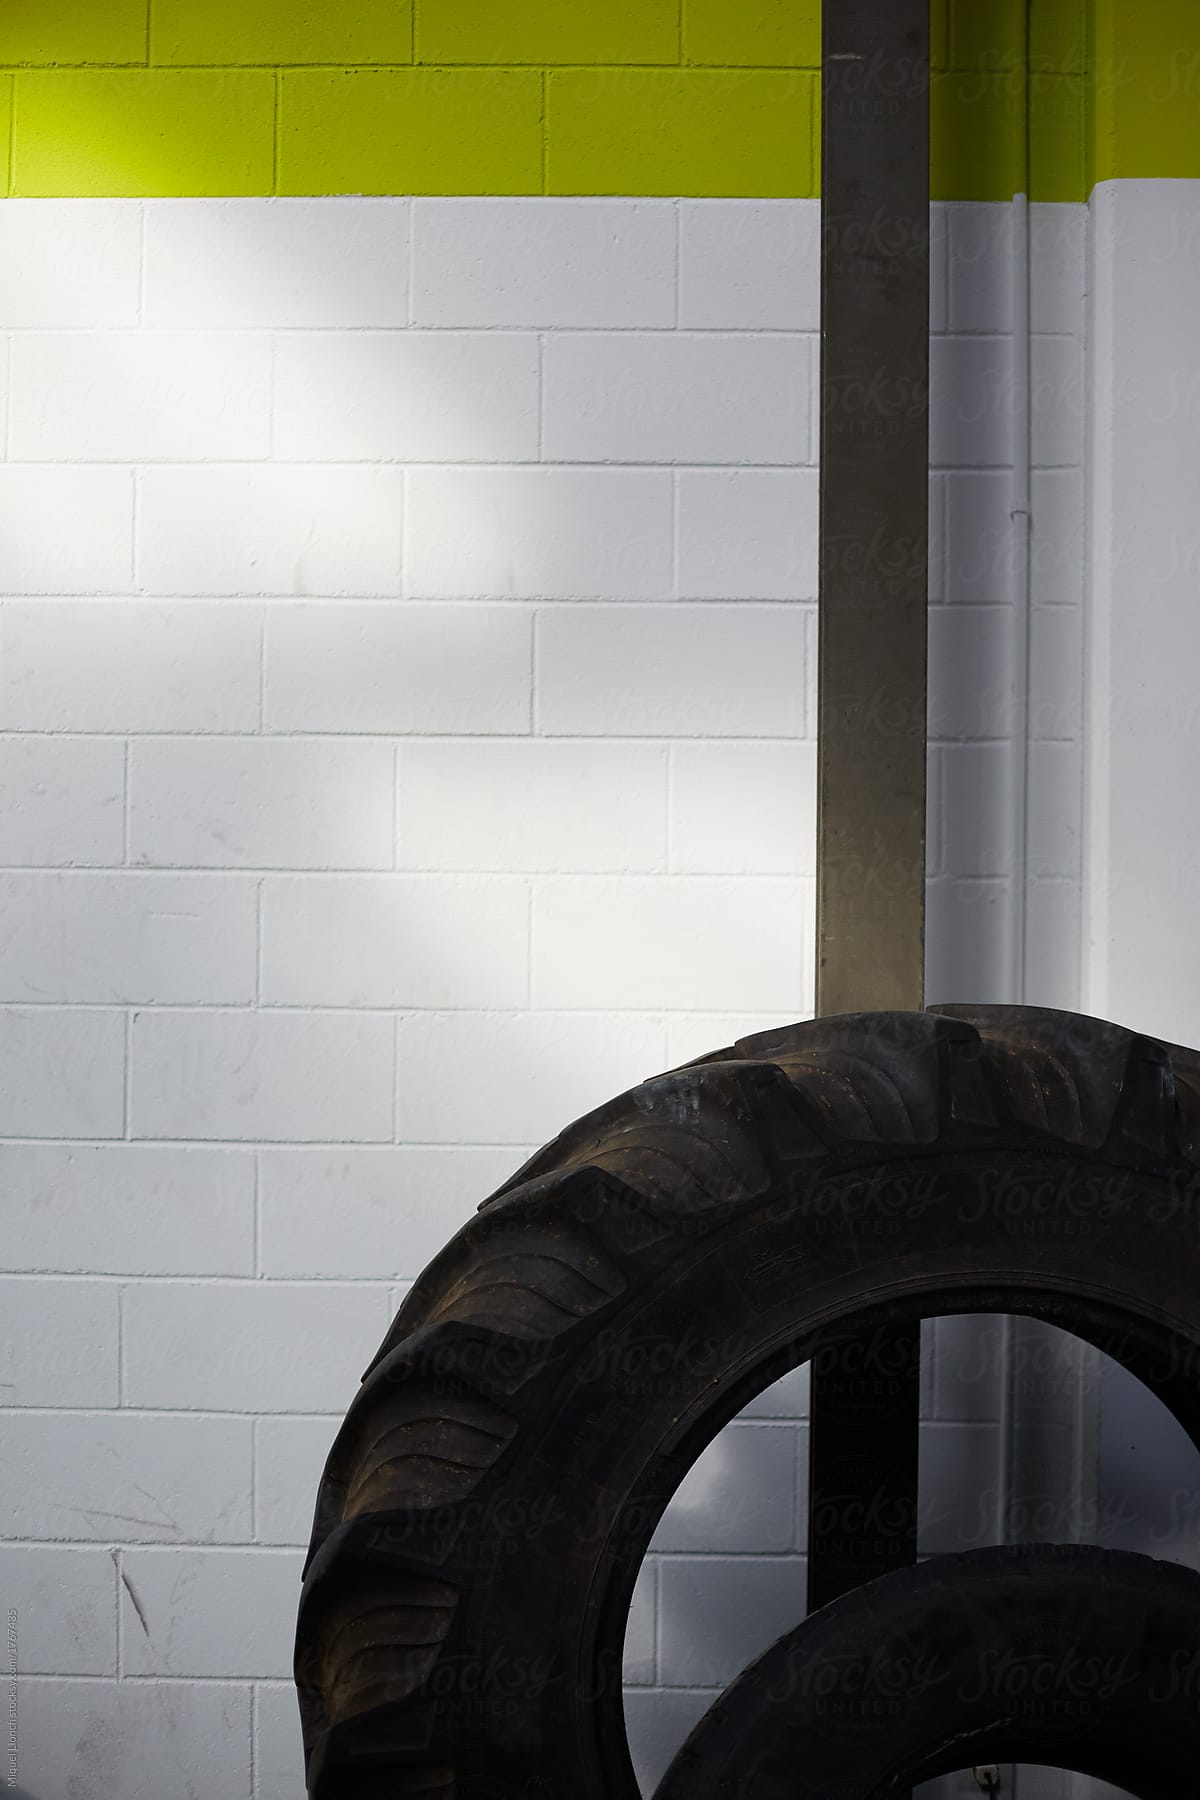 Big tires in a gym wall for exercising and workout